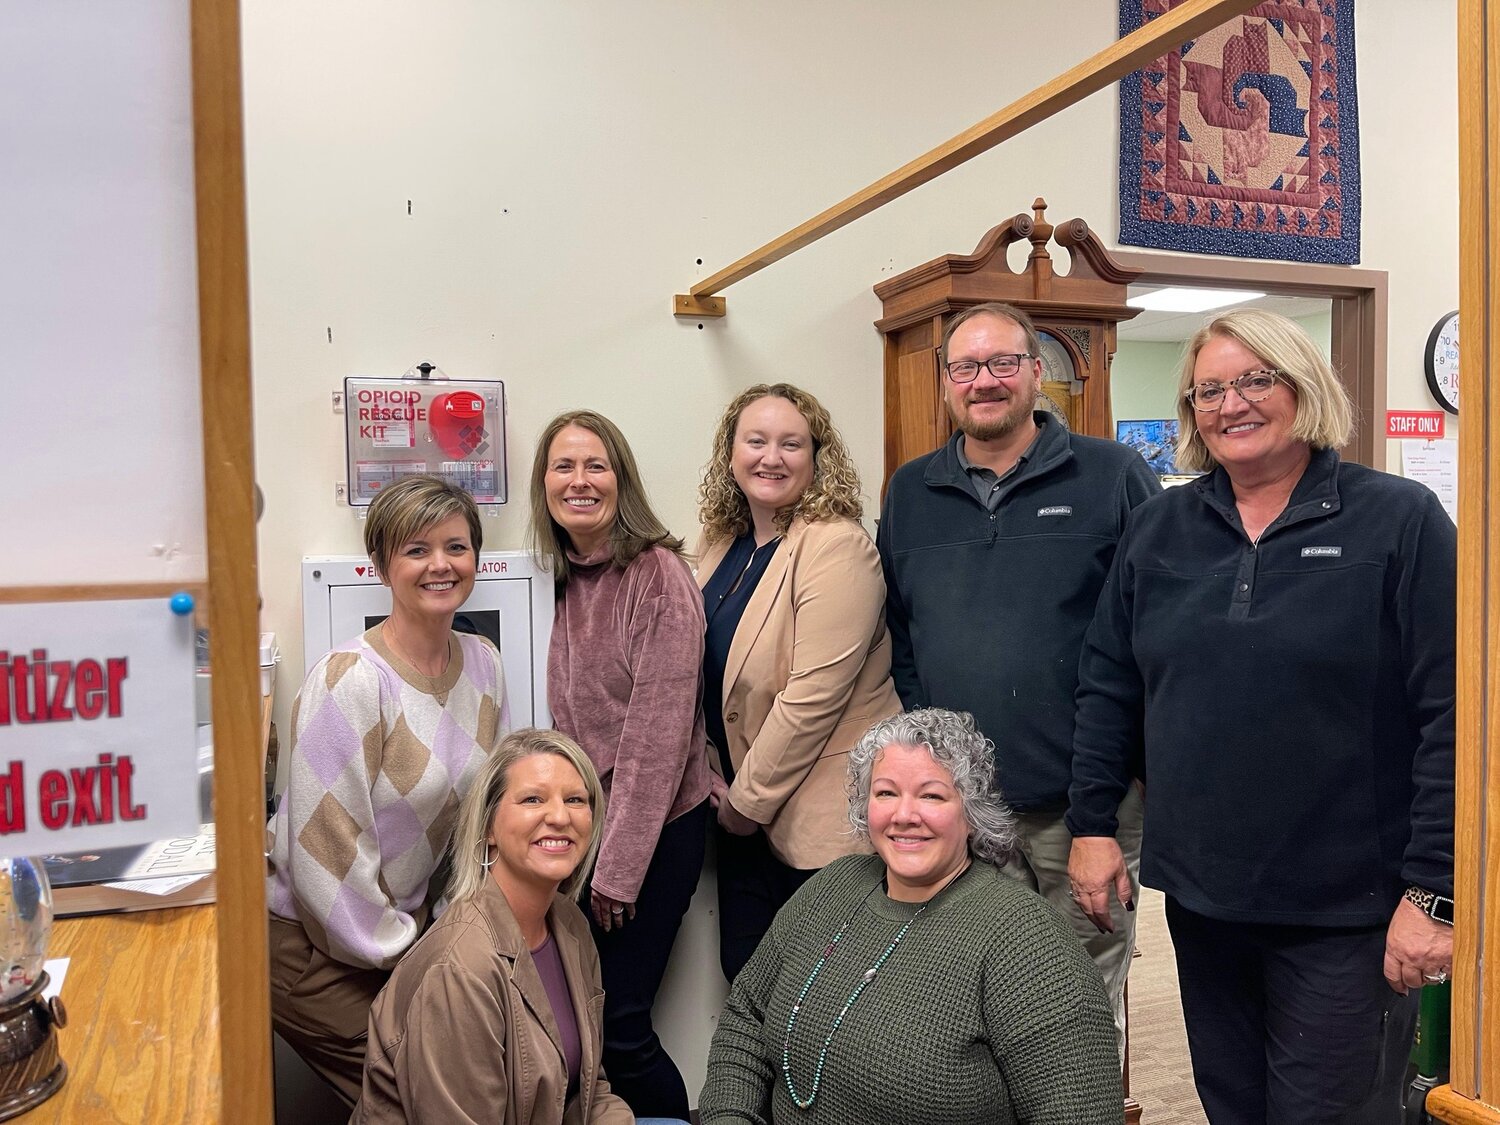 A team from the Arkansas Behavioral Health Integration Network (ABHIN) were at the Newton County Library
on Tuesday, Nov. 21, delivering an Opioid Rescue Kit. Pictured in back row are from left, Megan Copeland, peer specialist, ABHIN; Kim Shuler, CEO, ABHIN; Caitlyn Johnson, project manager, ABHIN; Josh Ramsey, peer specialist, Izard County Sheriff’s Office and Jasper Fire Department Chief Pam Emerson; front row, Ashley Sanders, peer specialist, Izard County Sheriff’s Office and Newton County Library Director Kenya Windel.